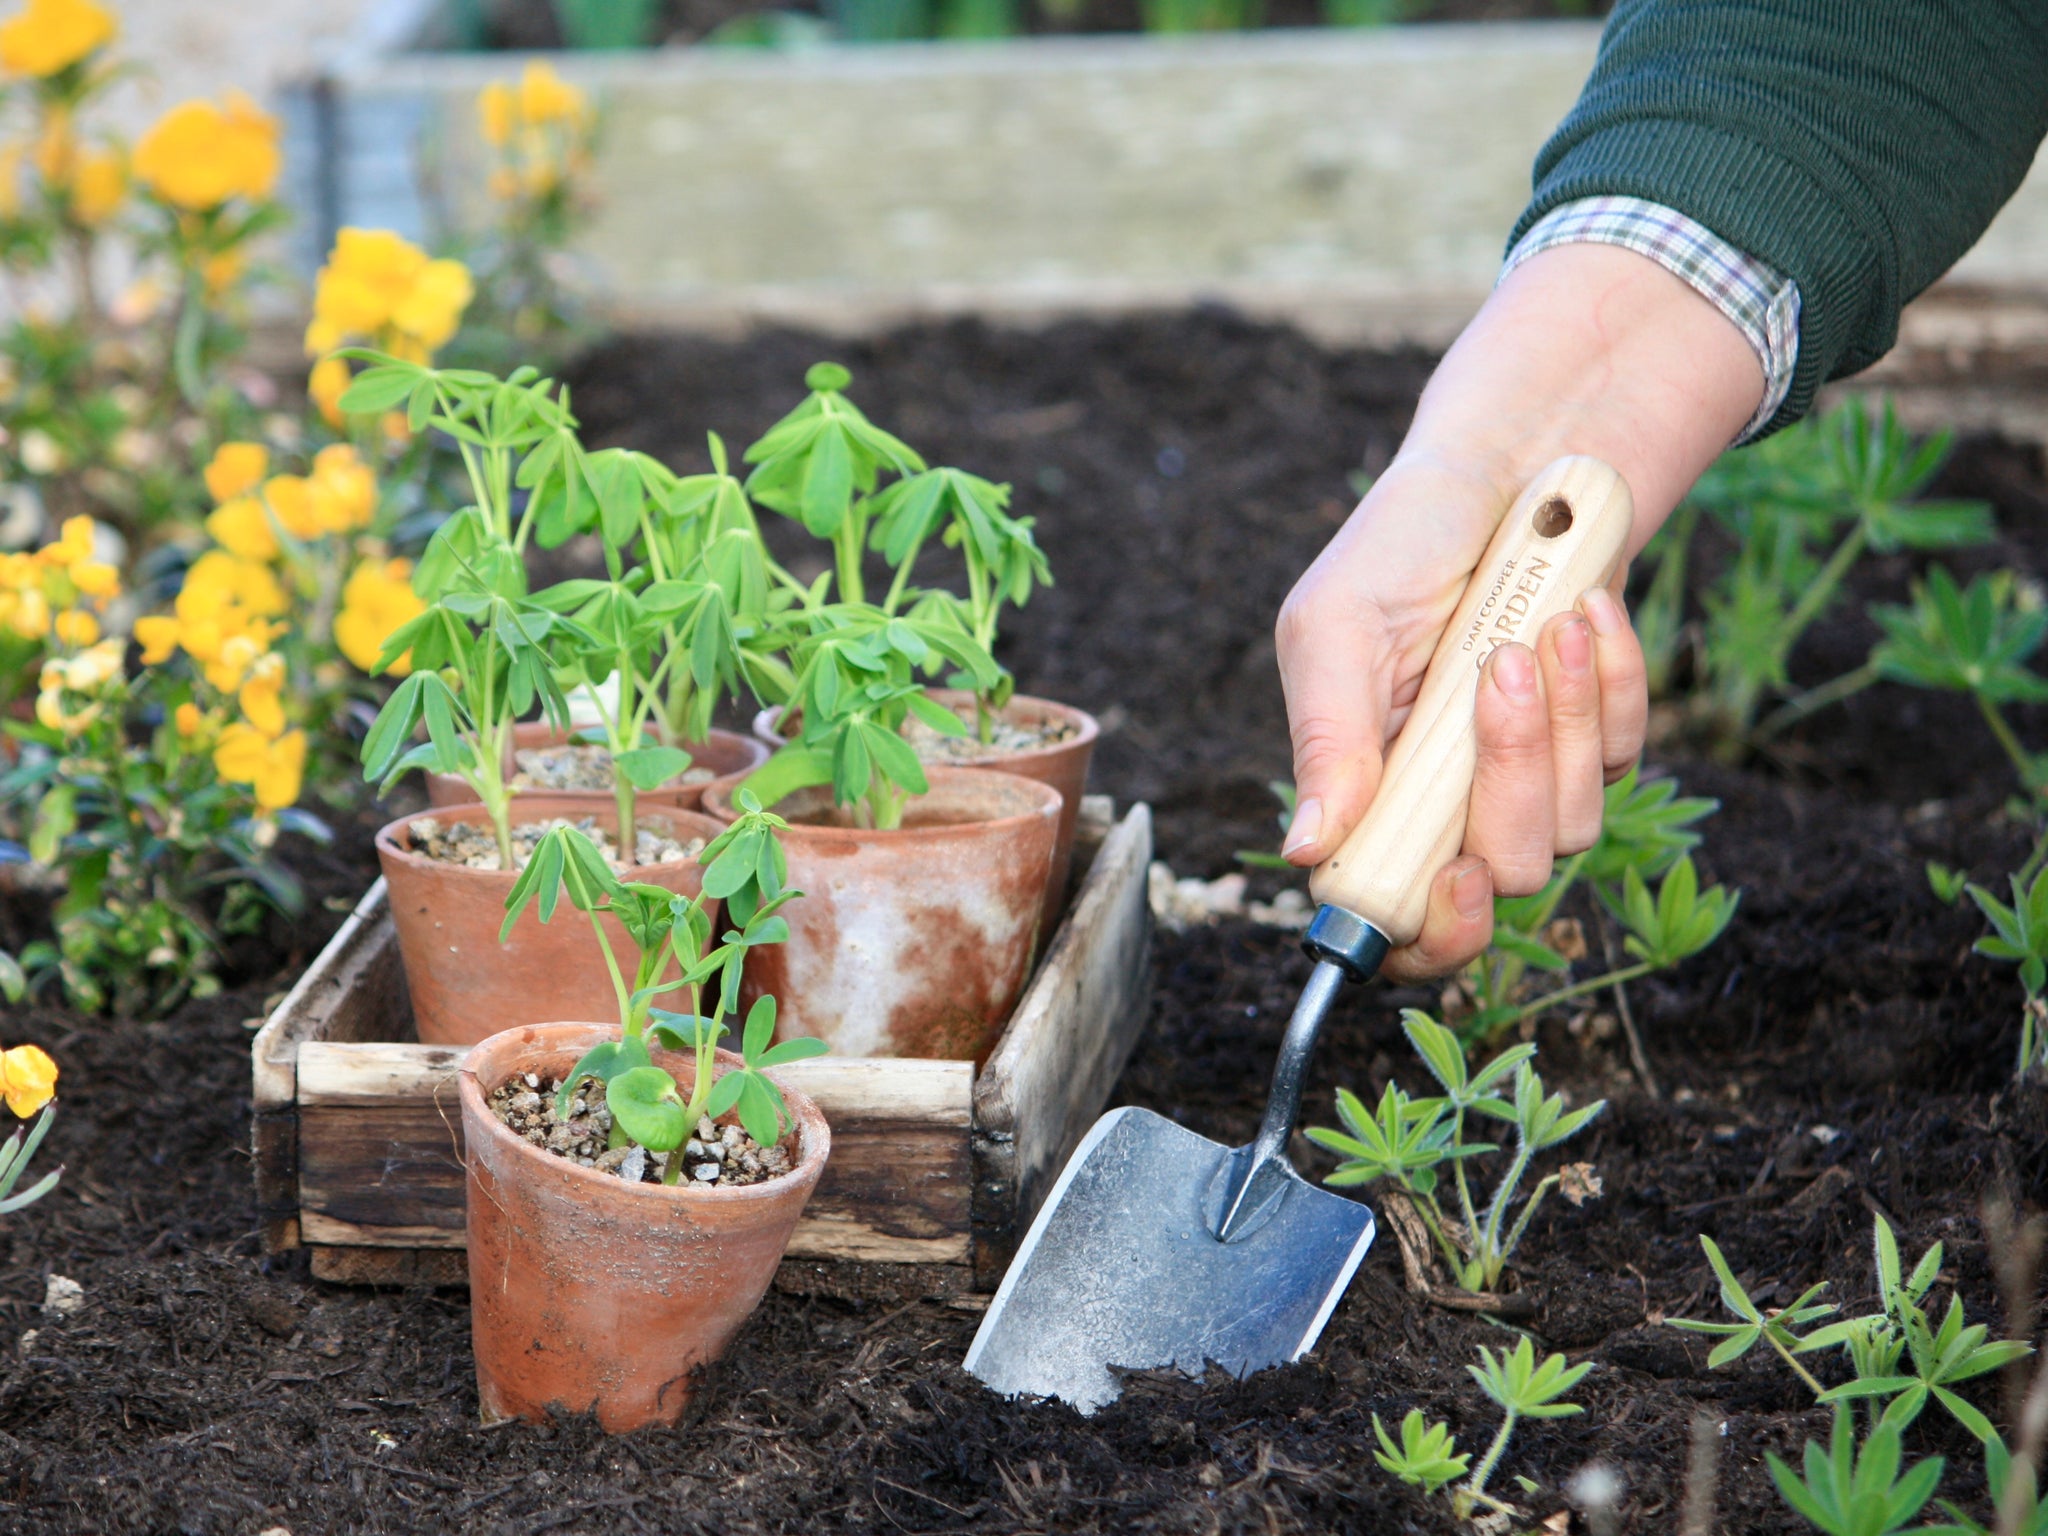 Planting lupins with a Dan Cooper Garden Signature Hand Trowel